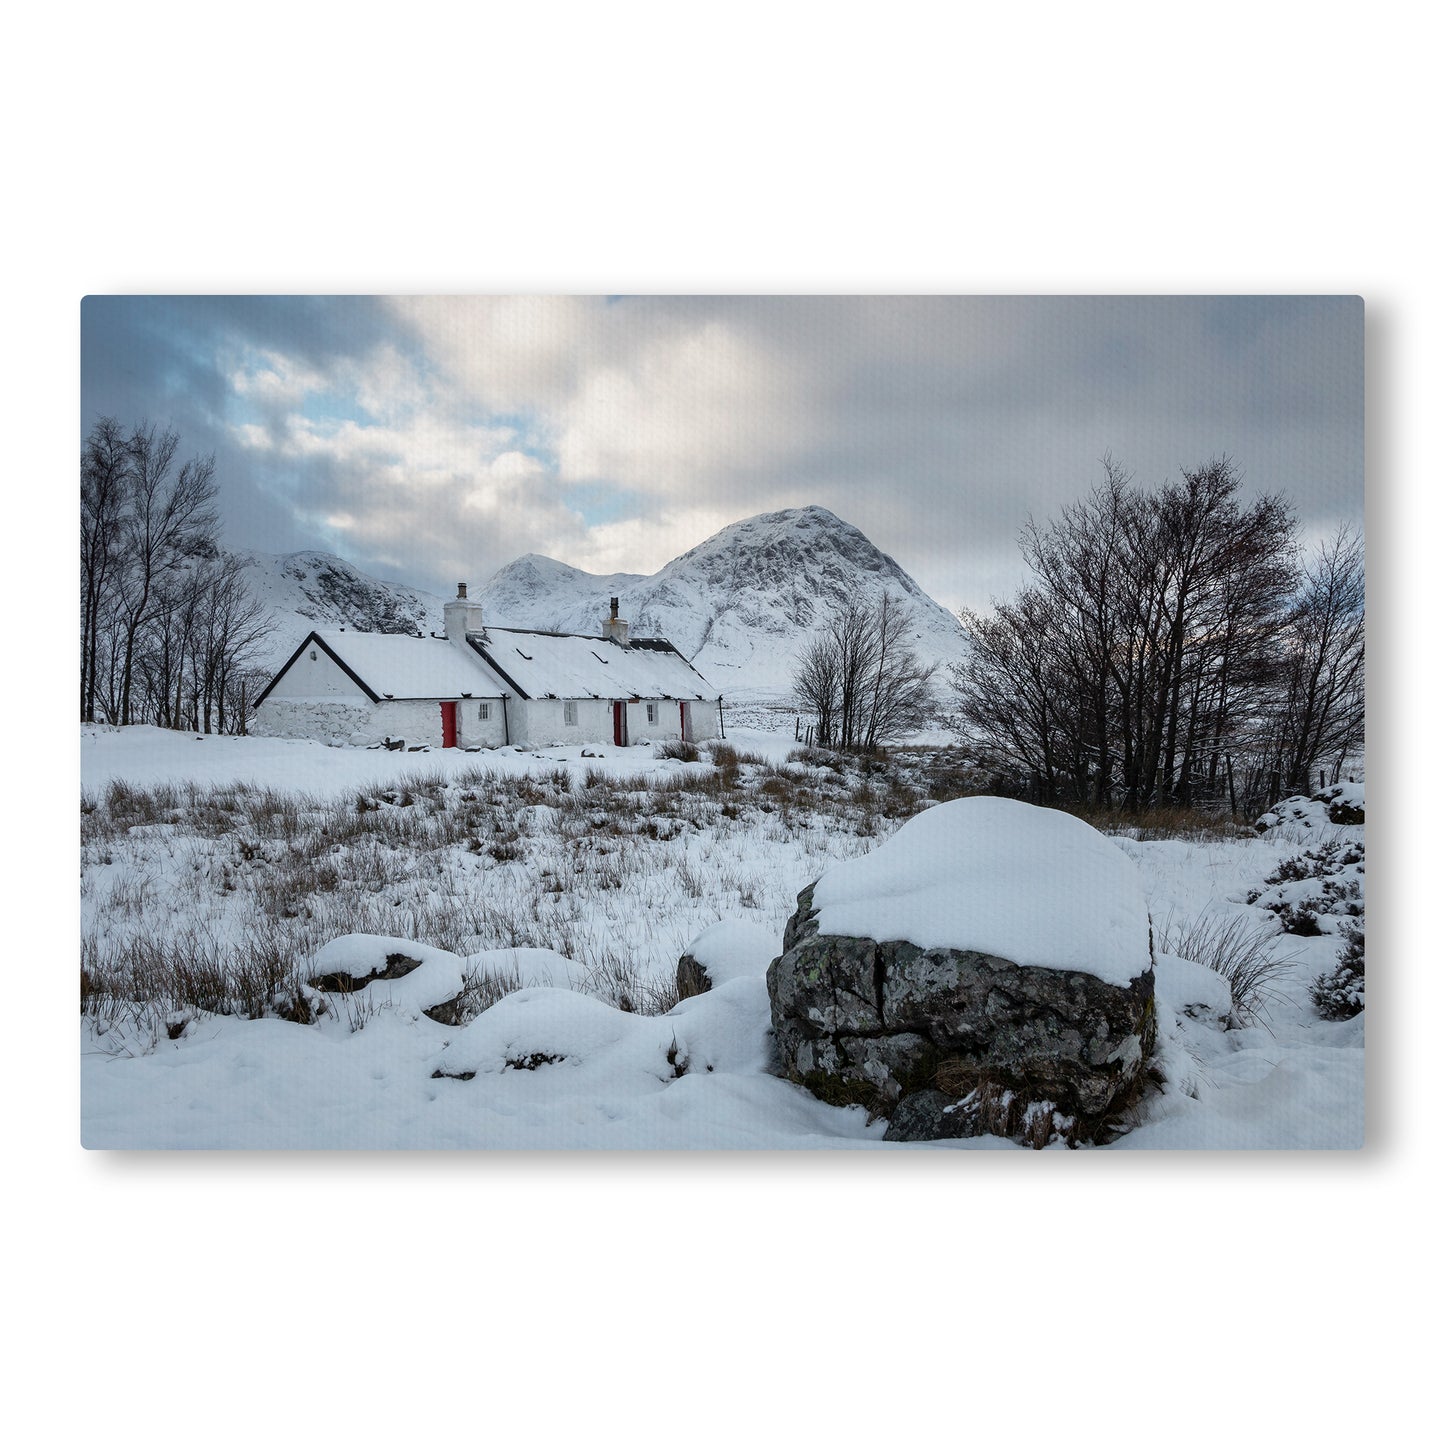 Canvas Print photo of Black Rock Cottage on the West Highland Way with Buachaille Etive Mor in the background